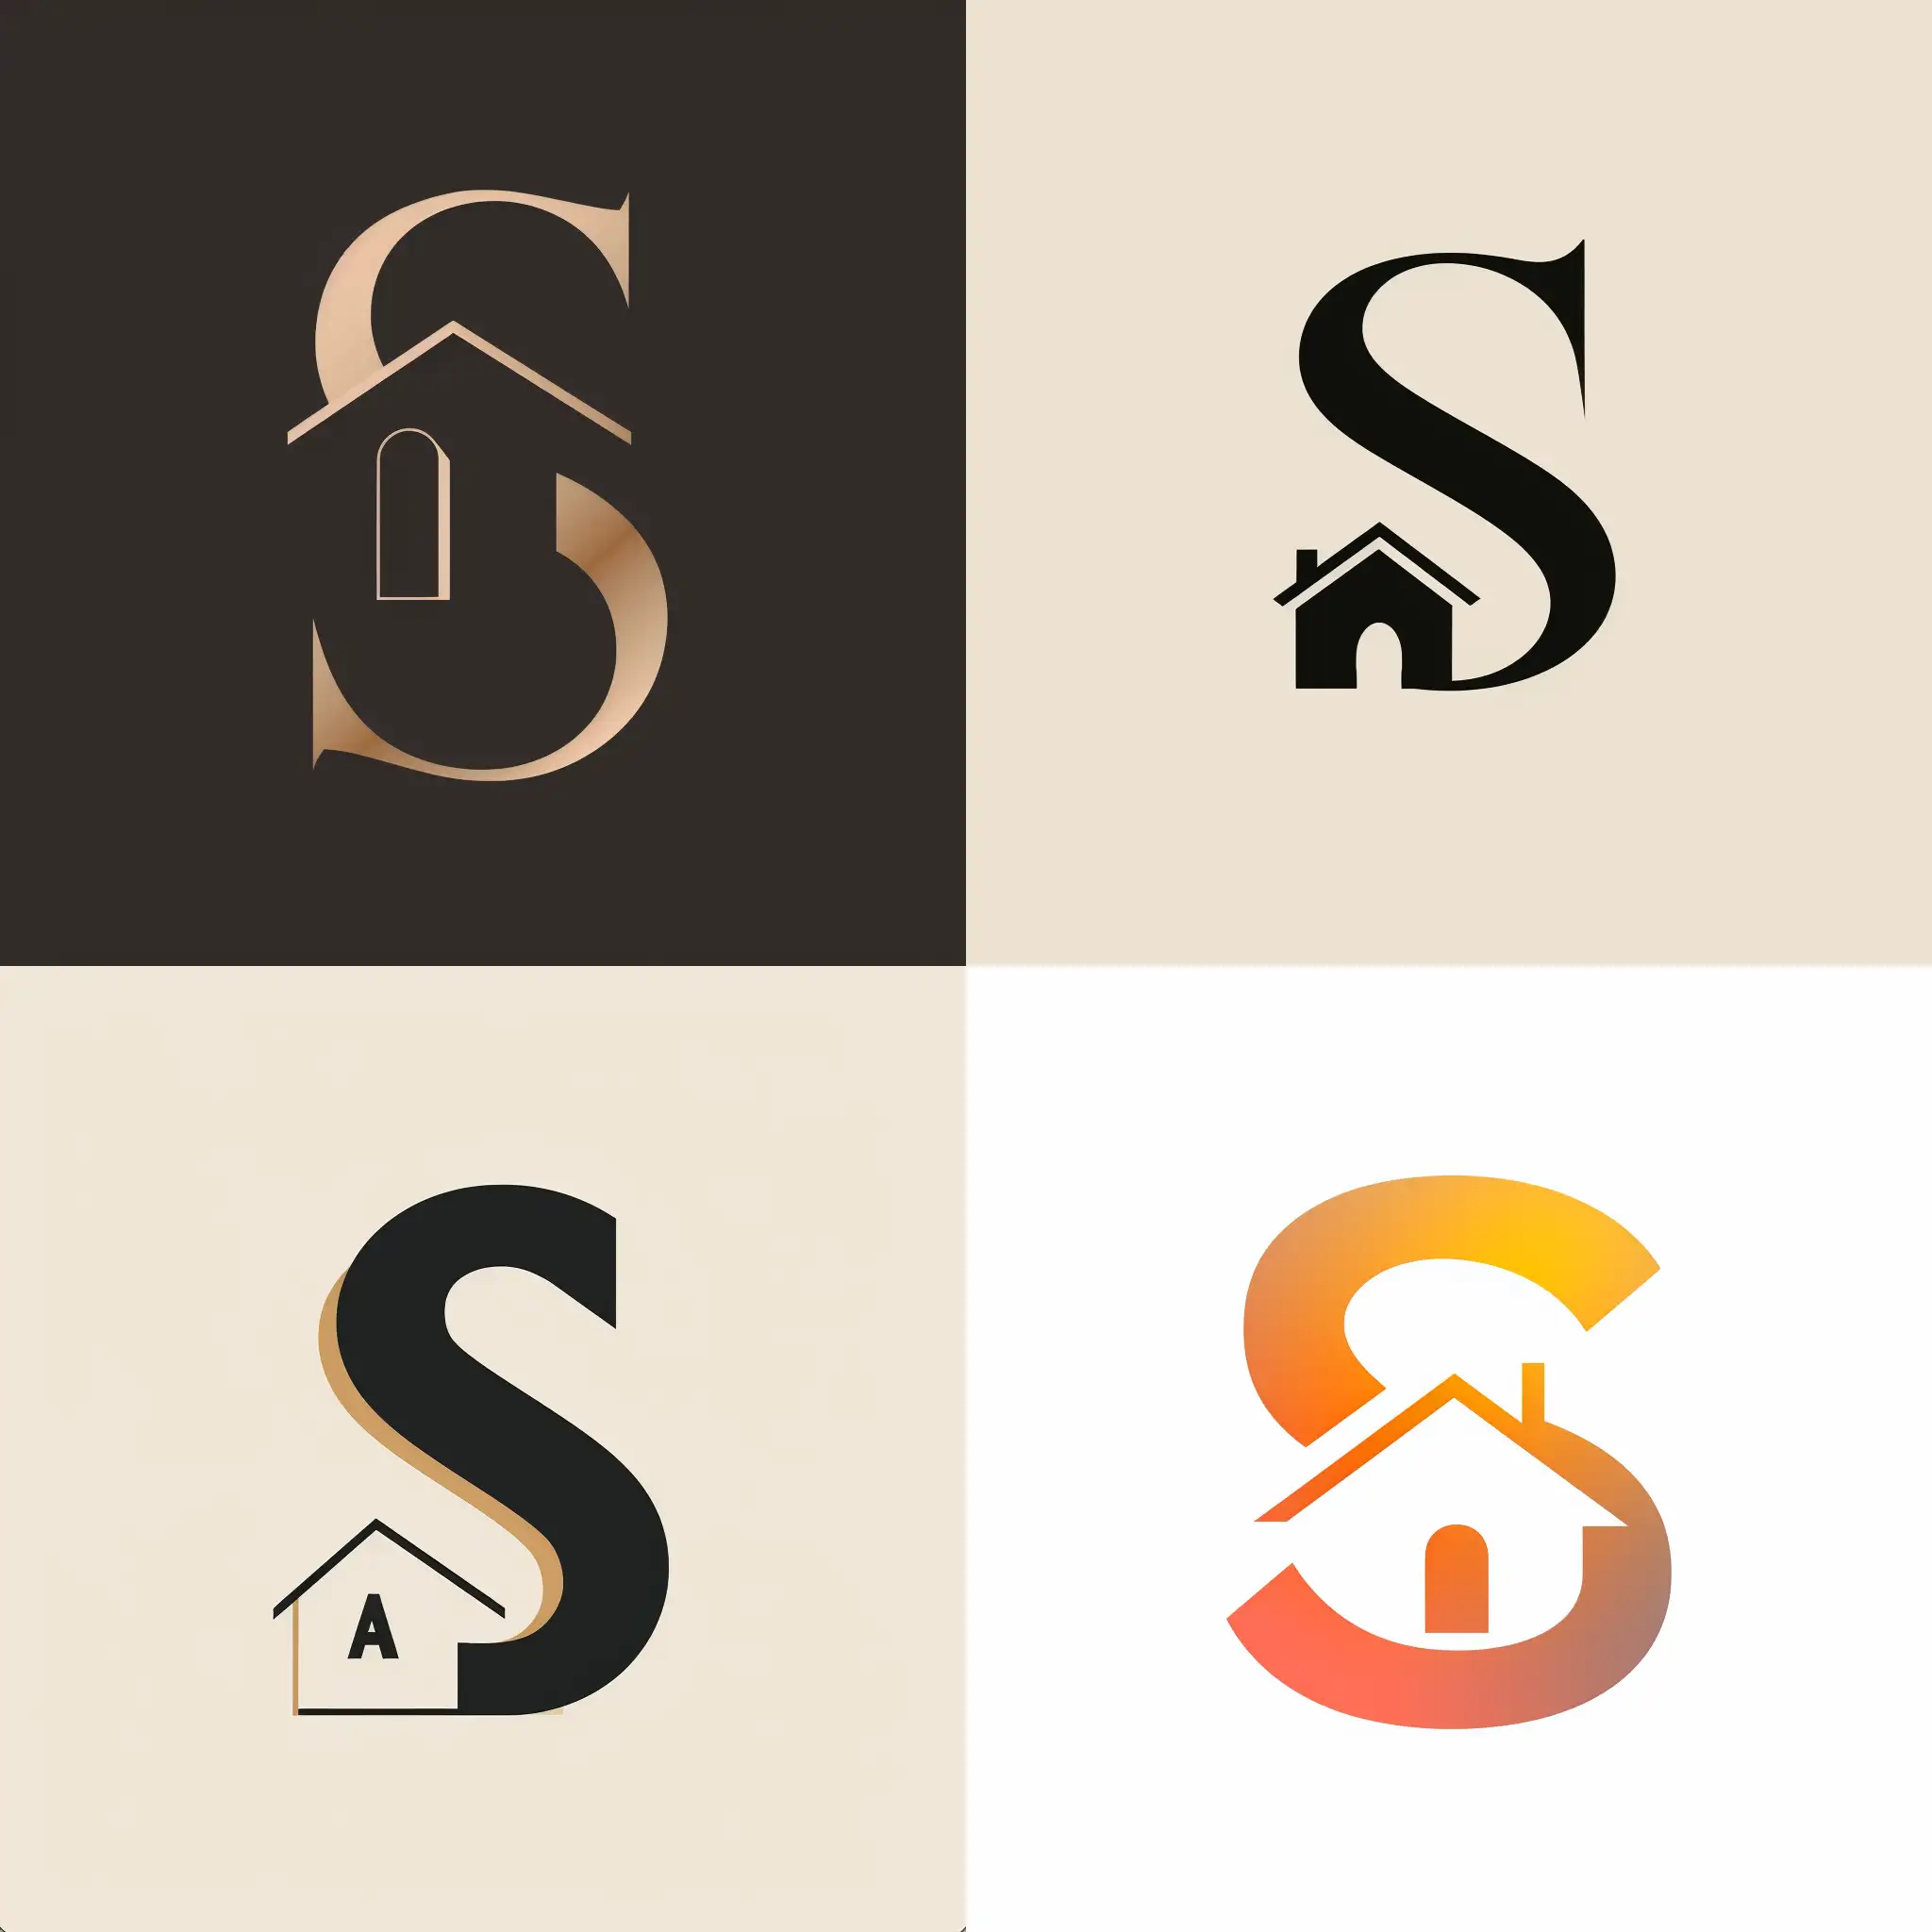 Create a "Song Anh" logo with a uniquely styled and prominent letter "S." Represent the letter "A" as a simple and modern house, evoking a warm and friendly feel with soft lines.